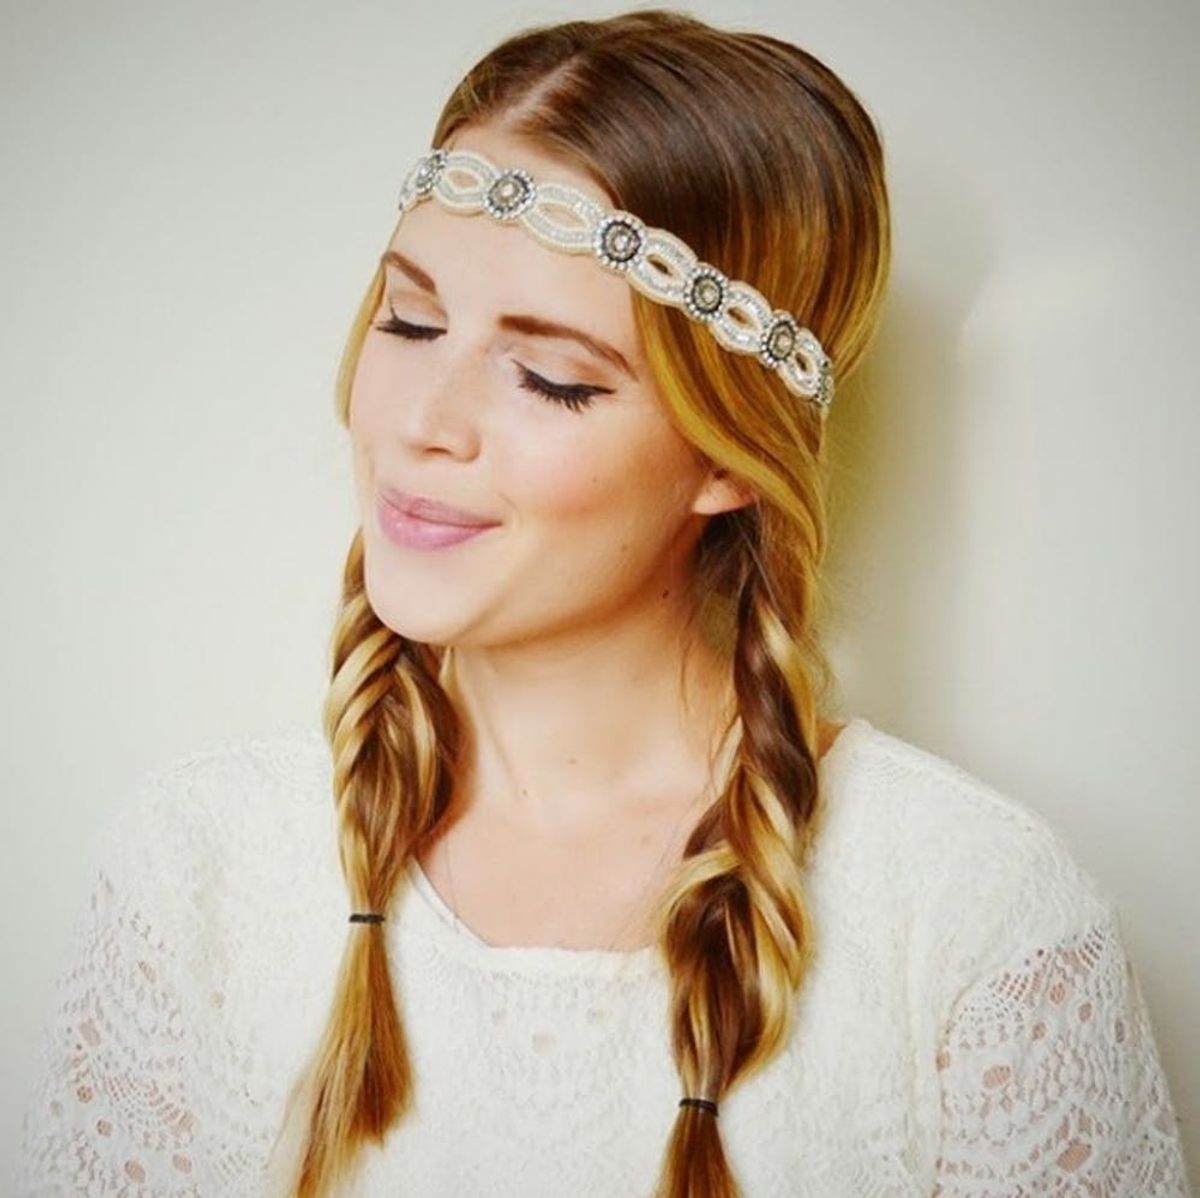 22 Stylish Tricks for Perfect Festival Hair